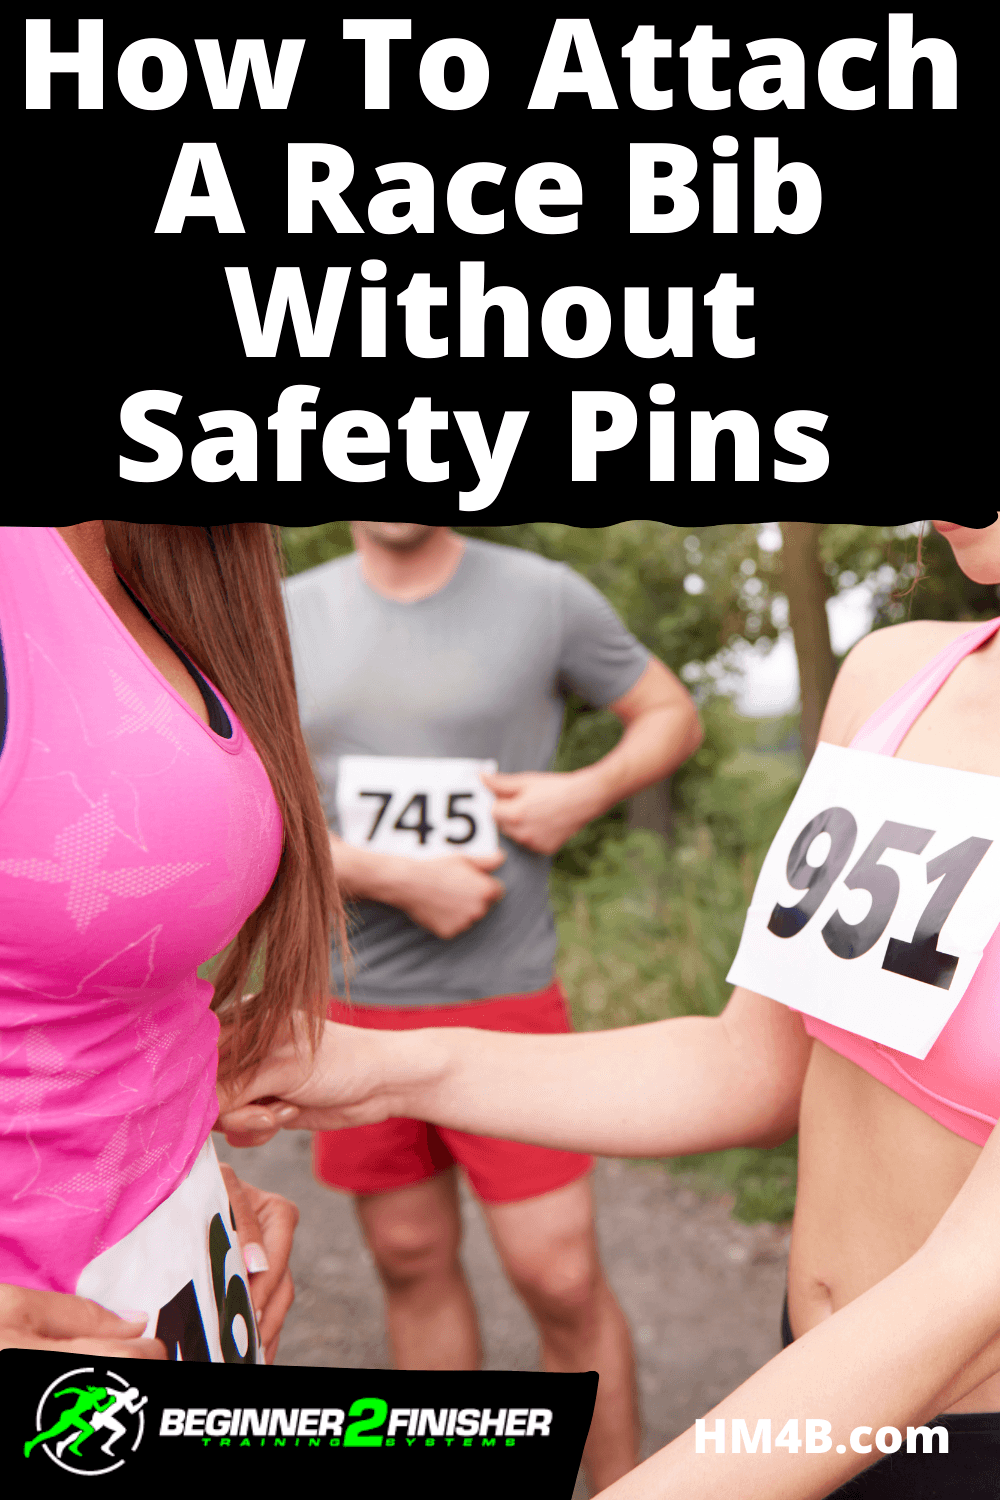 How To Attach A Race Bib Without Safety Pins (Simple Quick Hack)